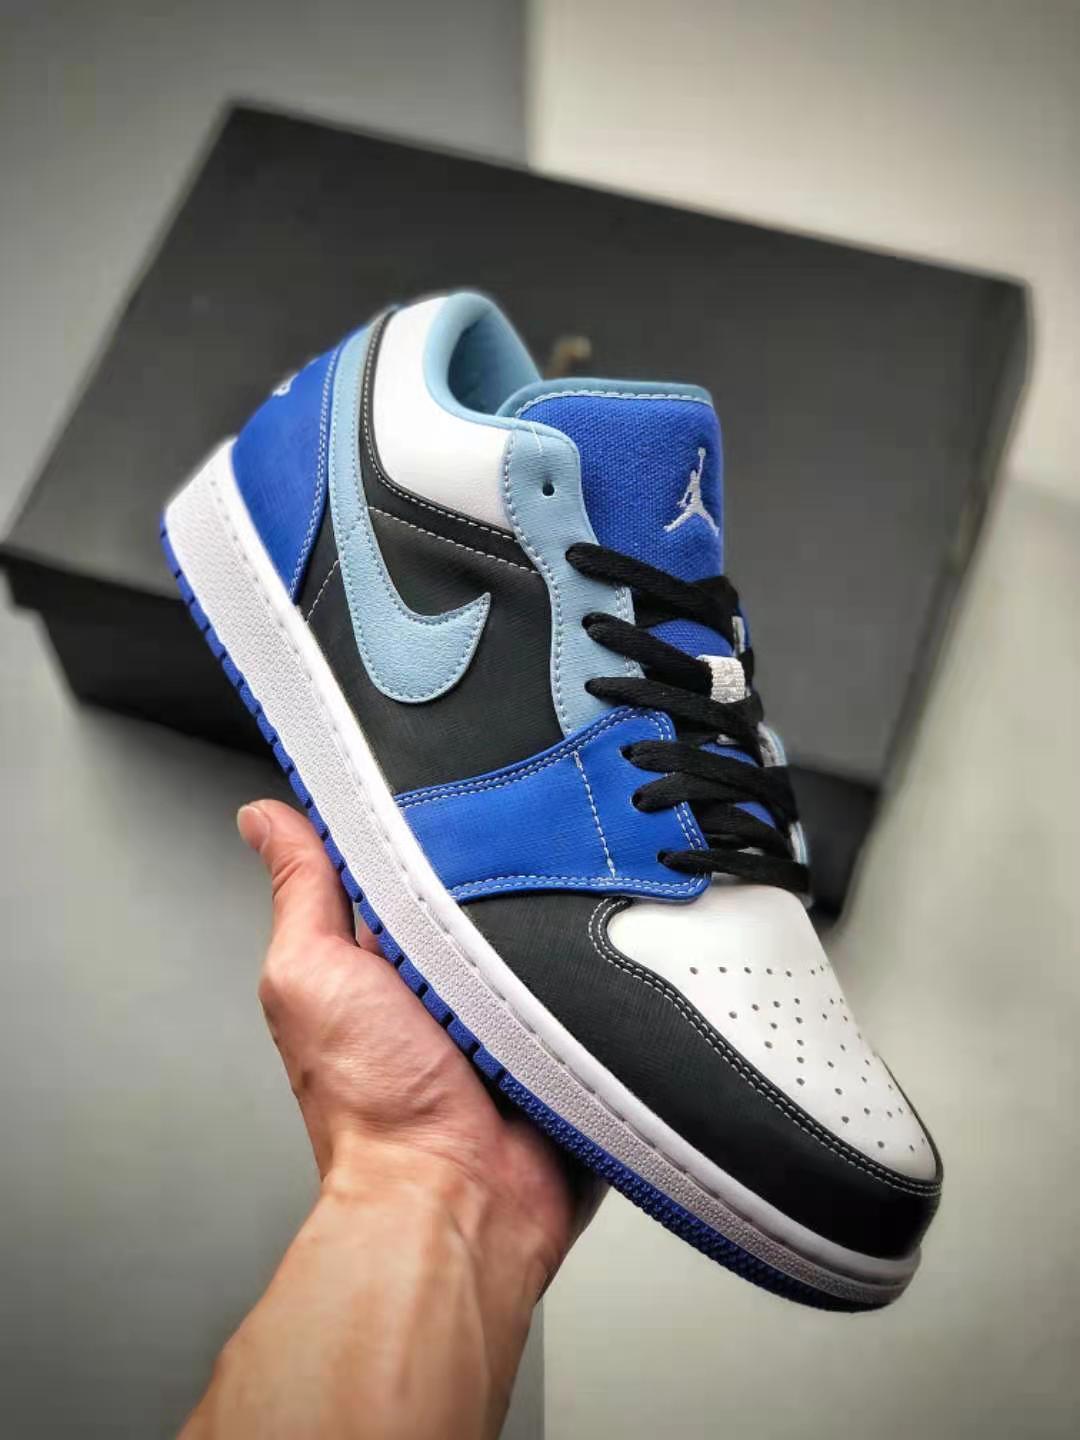 Air Jordan 1 Low SE 'Racer Blue' DH0206-400 | Limited Edition Sneakers